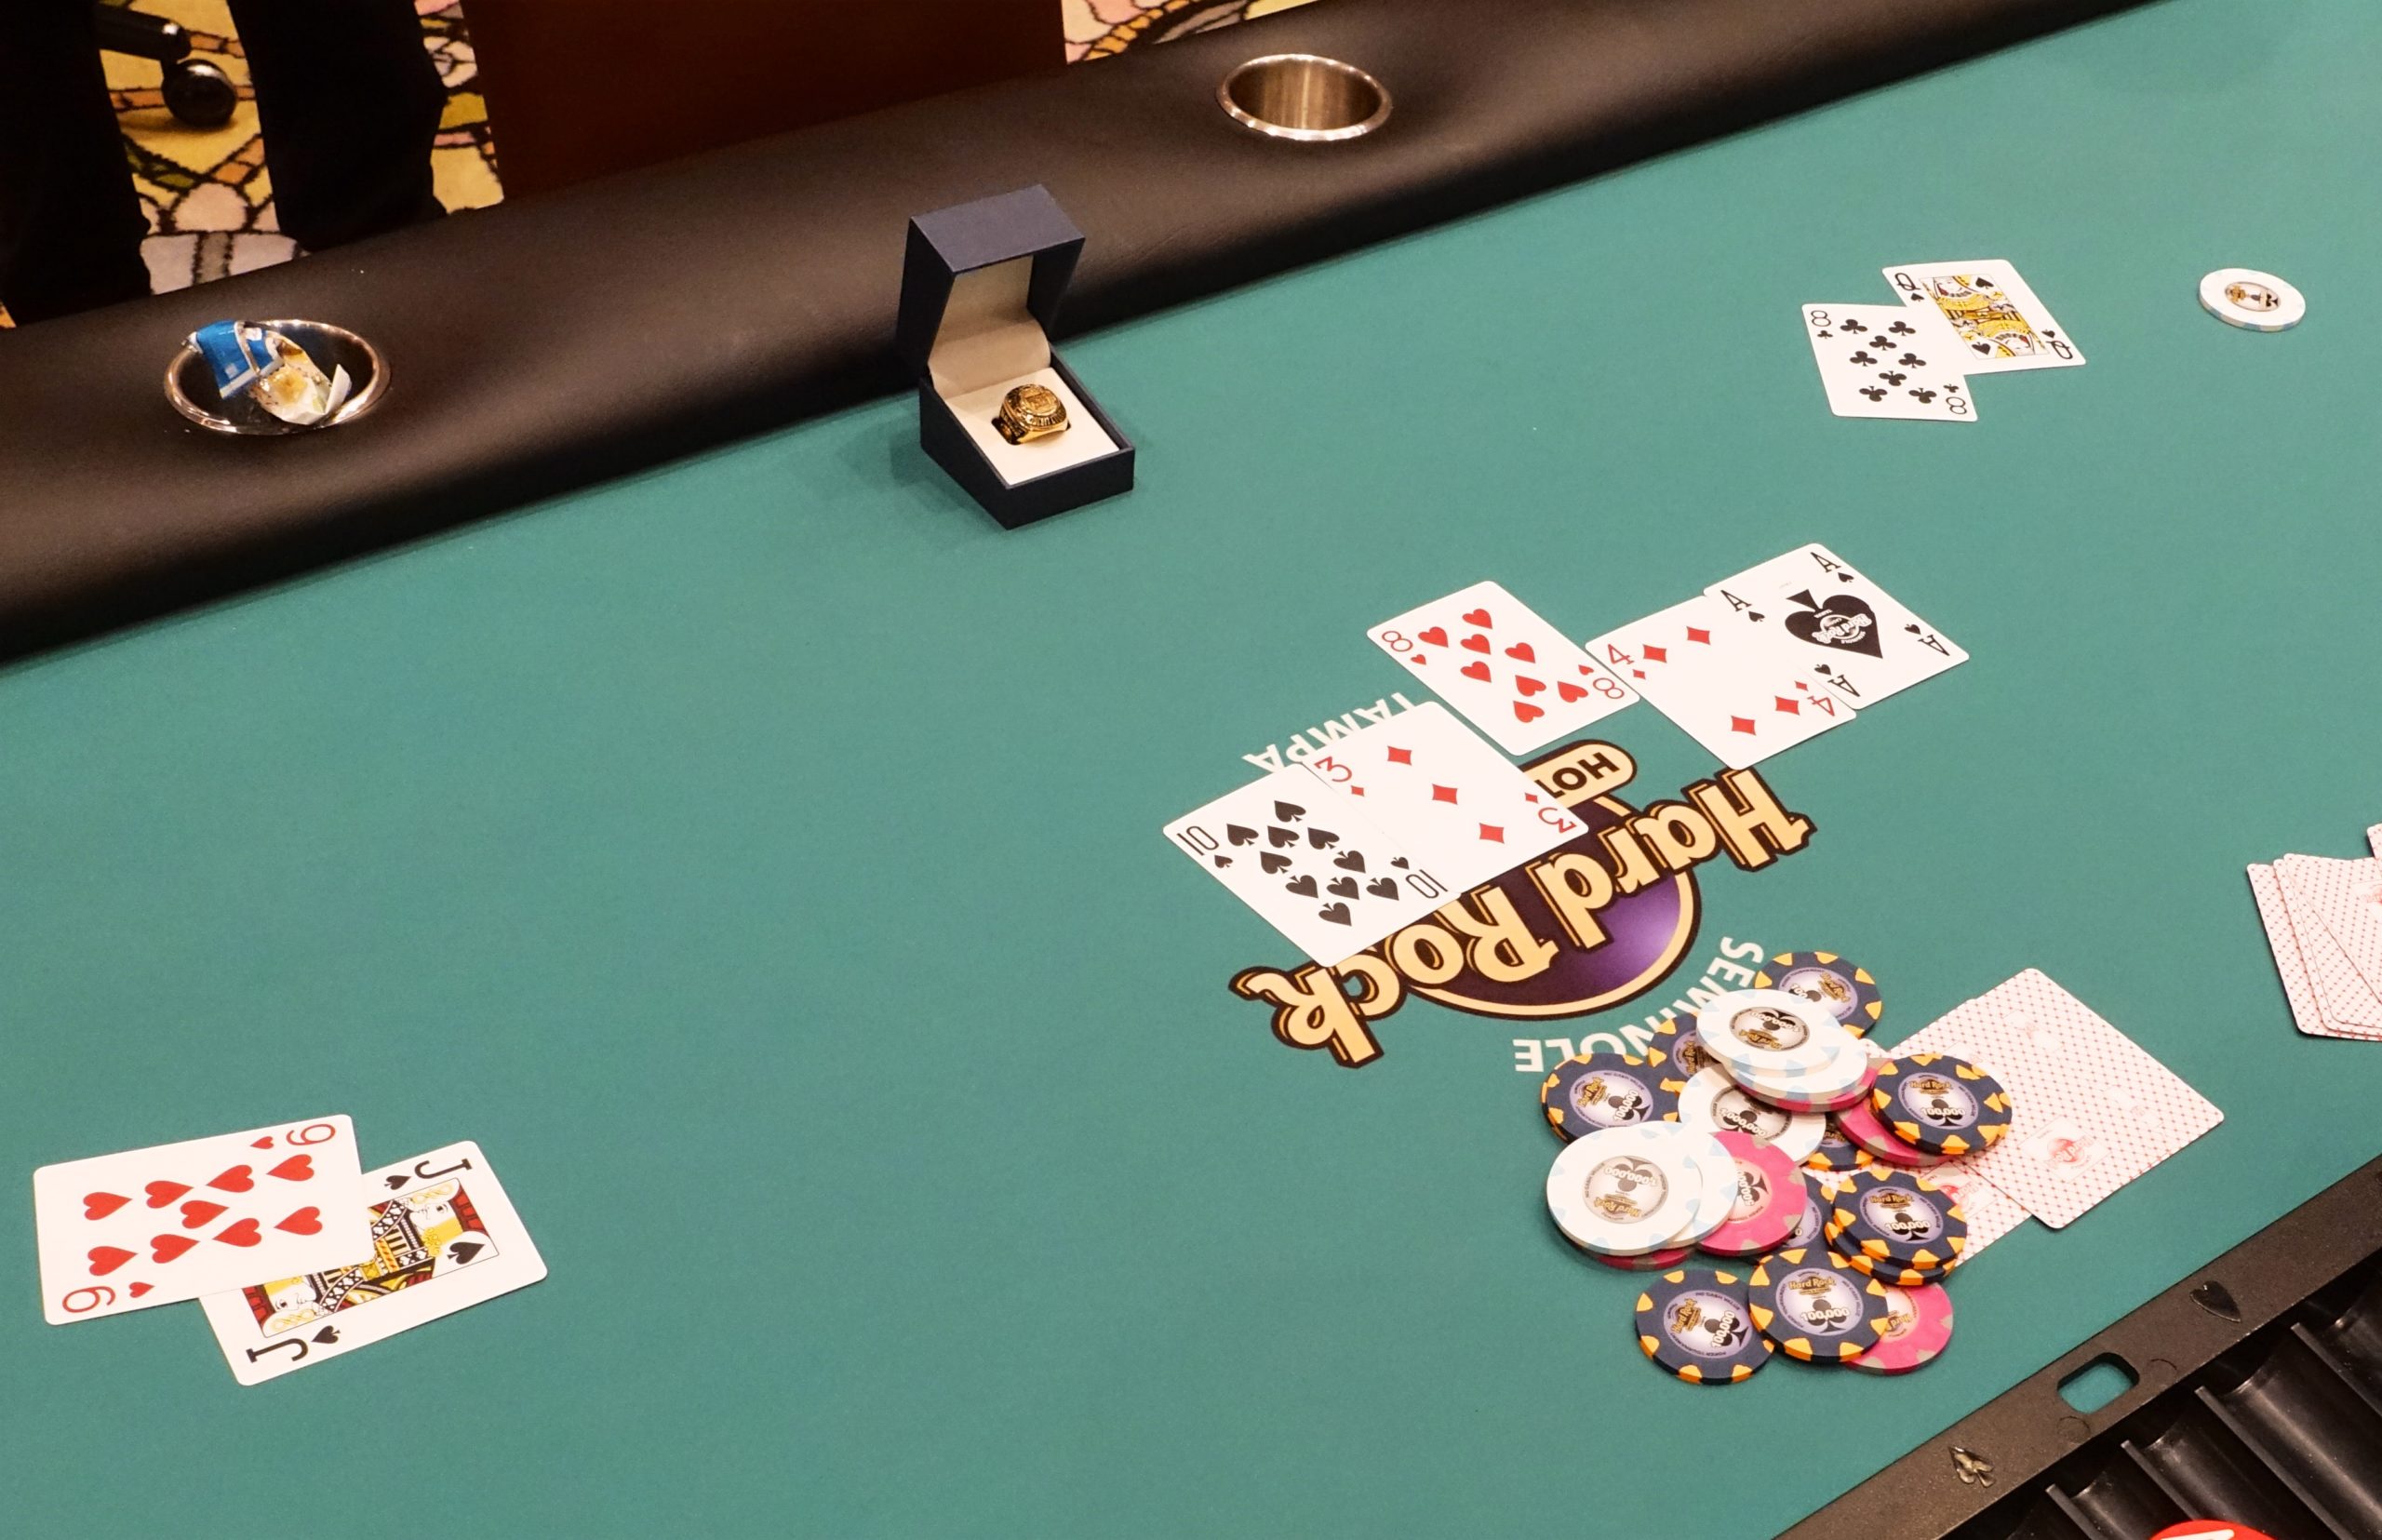 Final Hand of the WSOP Circuit Main Event, with J-9 bluffing against Q-8 on a board of 10-8-3-4-A.